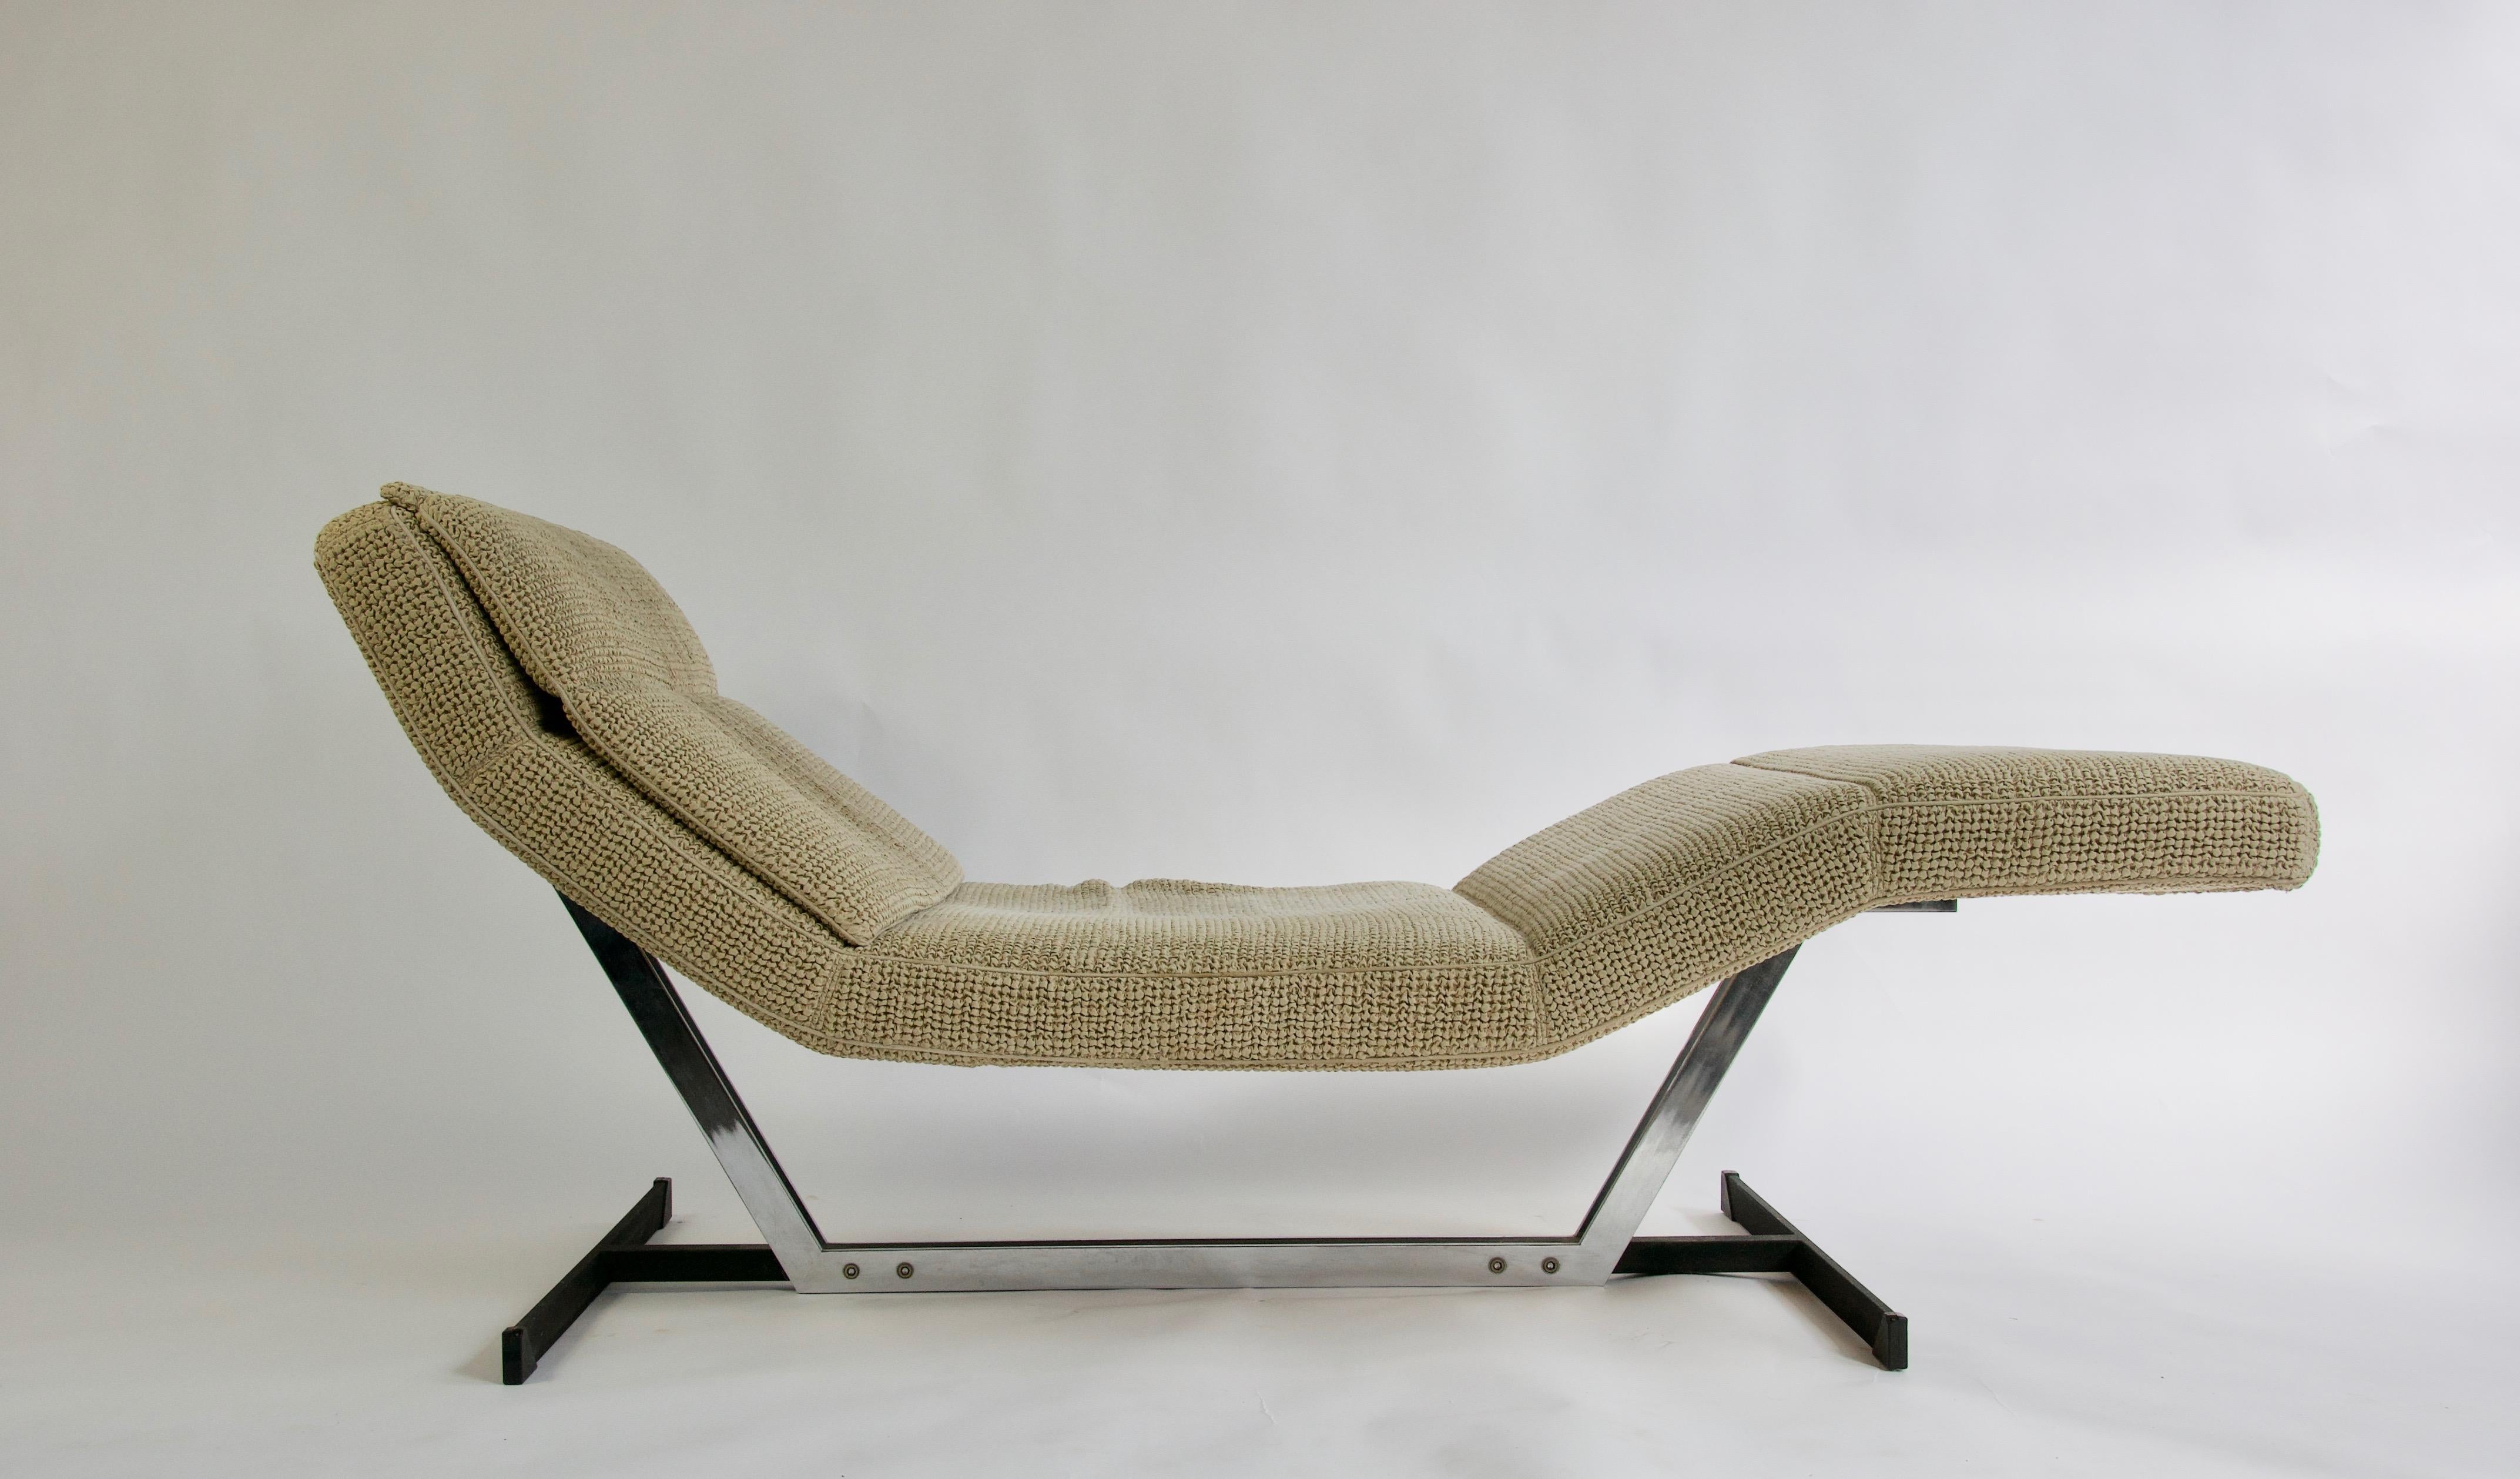 Offered by OLIVER MODERN
Rare Saporiti chaise. Architectural steel base. Signed.